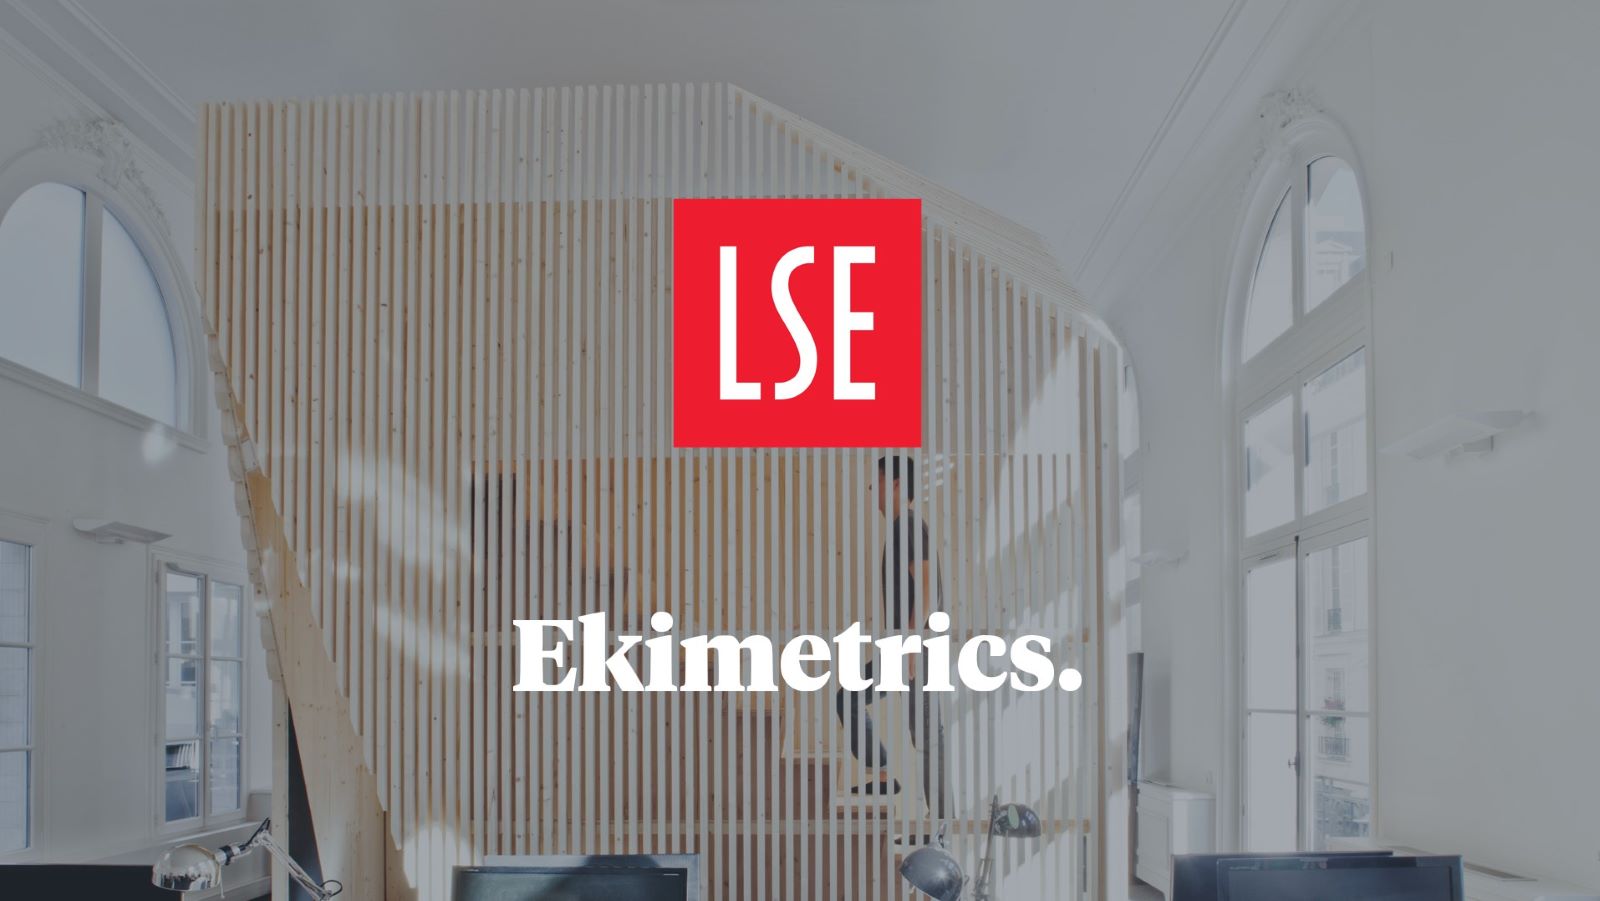 Ekimetrics partners with LSE’s Data Science Institute for sustainability programme